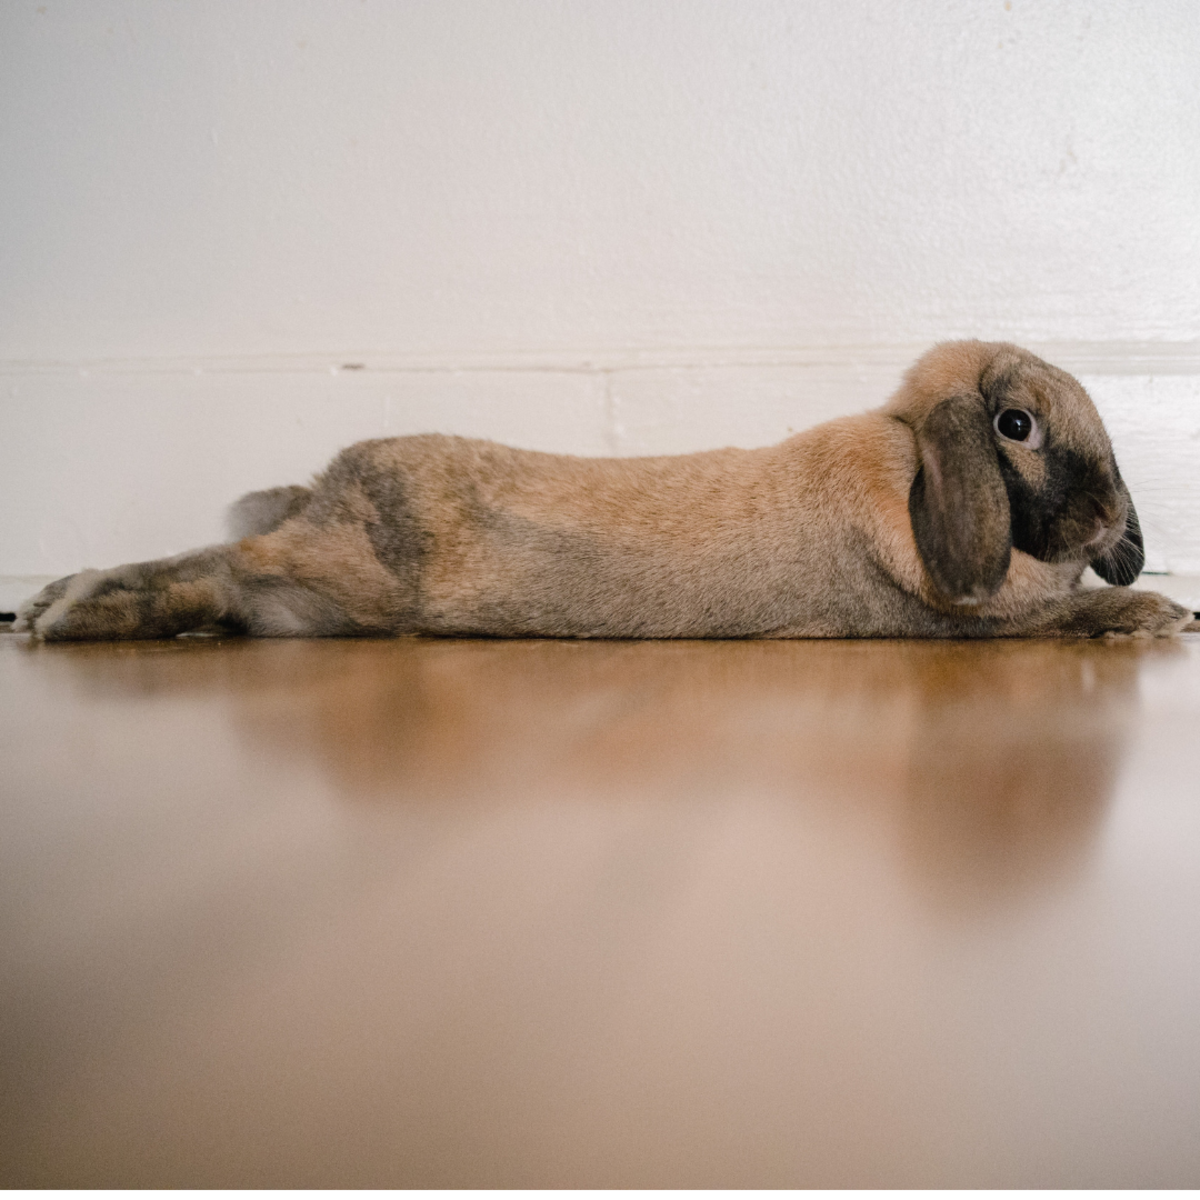 Relaxed posture in a bunny.